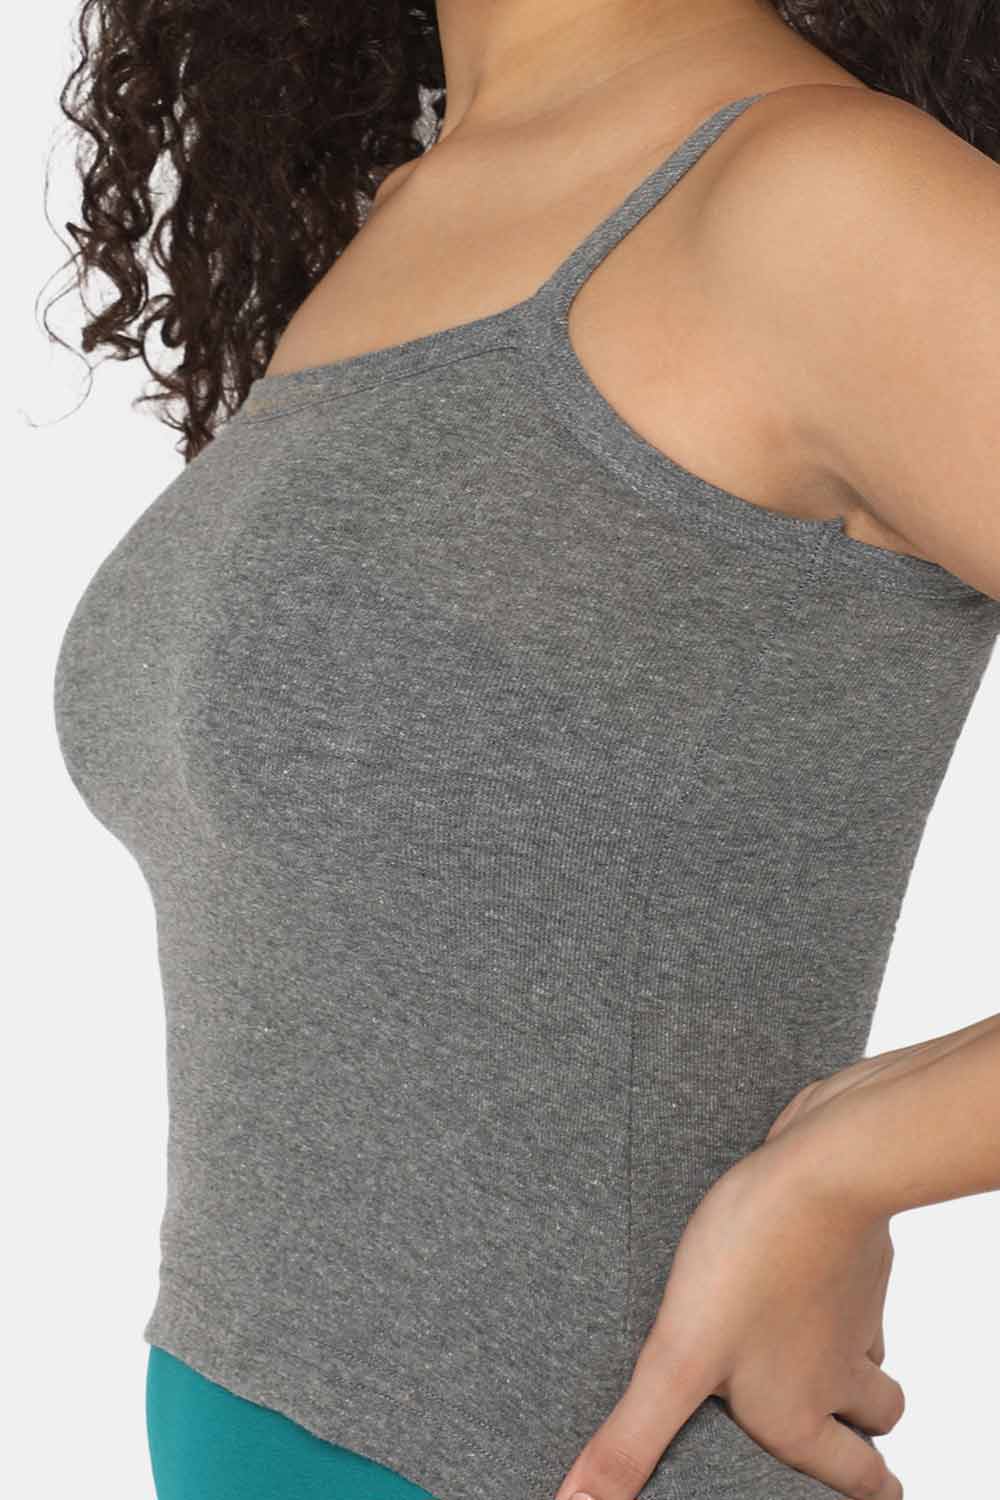 Intimacy Camisole-Slip Special Combo Pack - In01 - Pack of 3 - C52